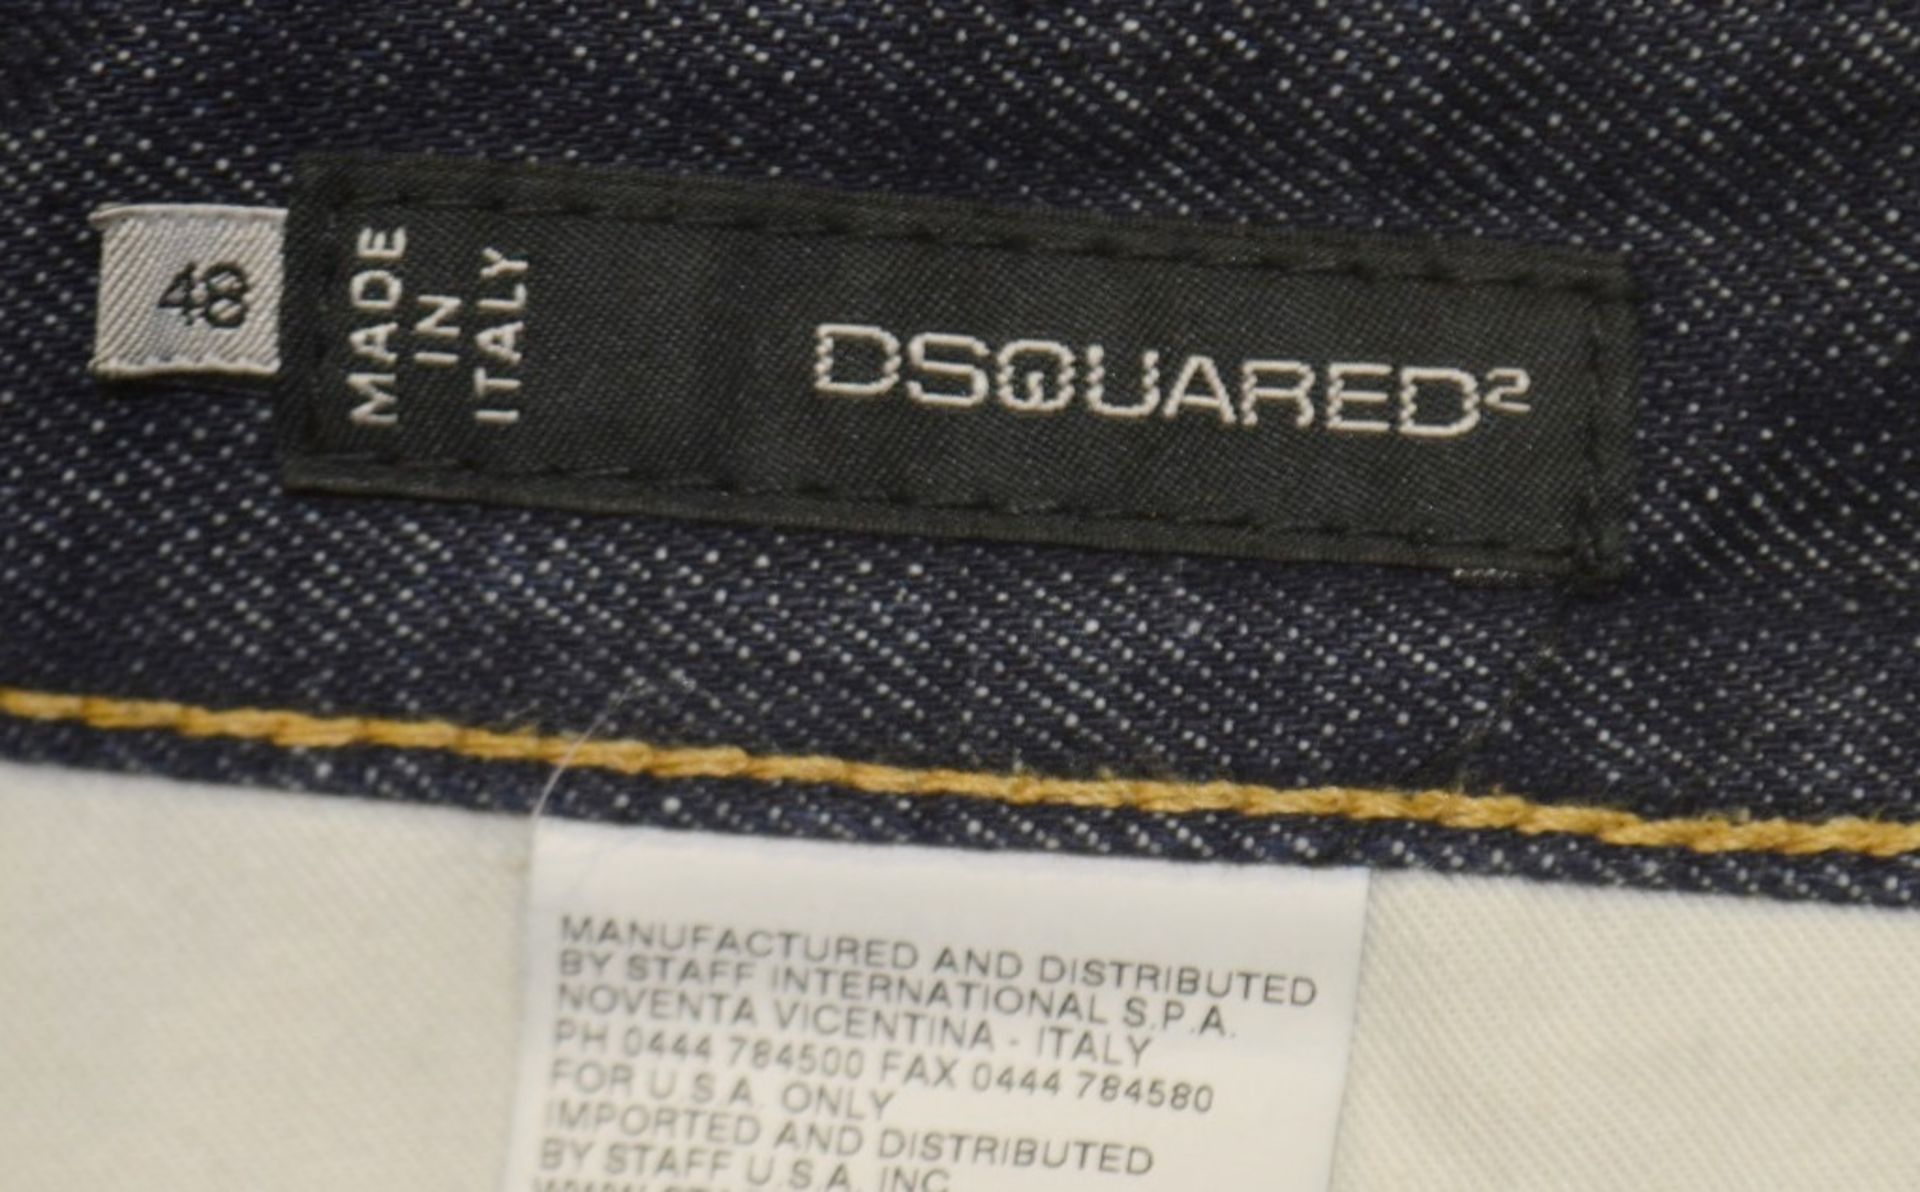 1 x Pair Of Men's Genuine Dsquared2 Designer Distressed-Style Jeans In Dark Blue - Size: UK32 - Image 5 of 8